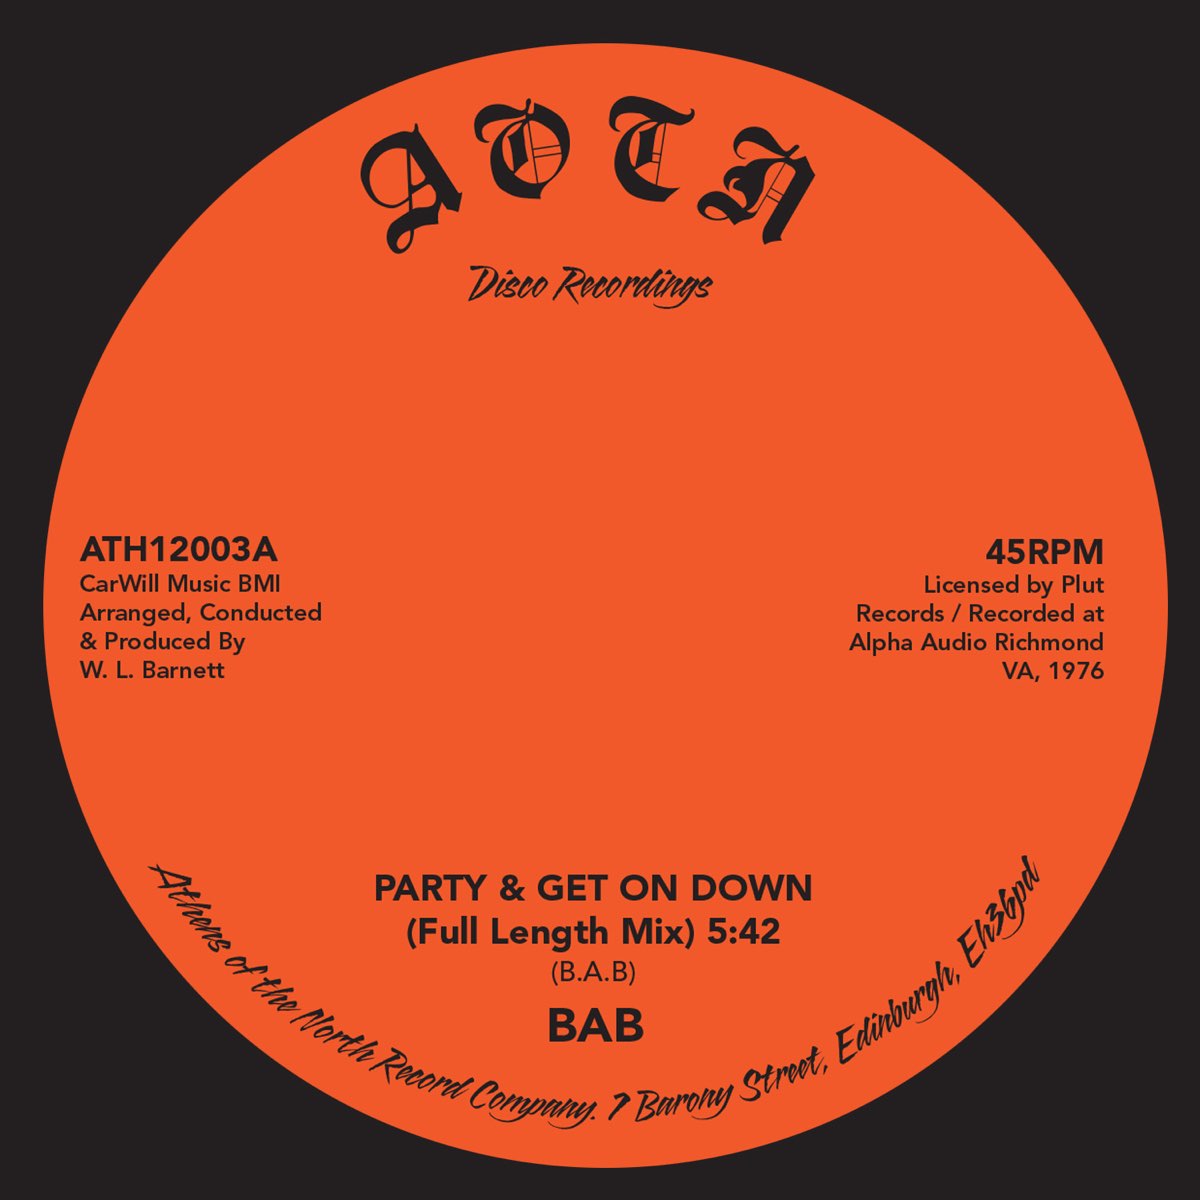 Get this party. Got Party. Raw Soul Express — Raw Soul Express. 1976 Party. Звуки get Party.